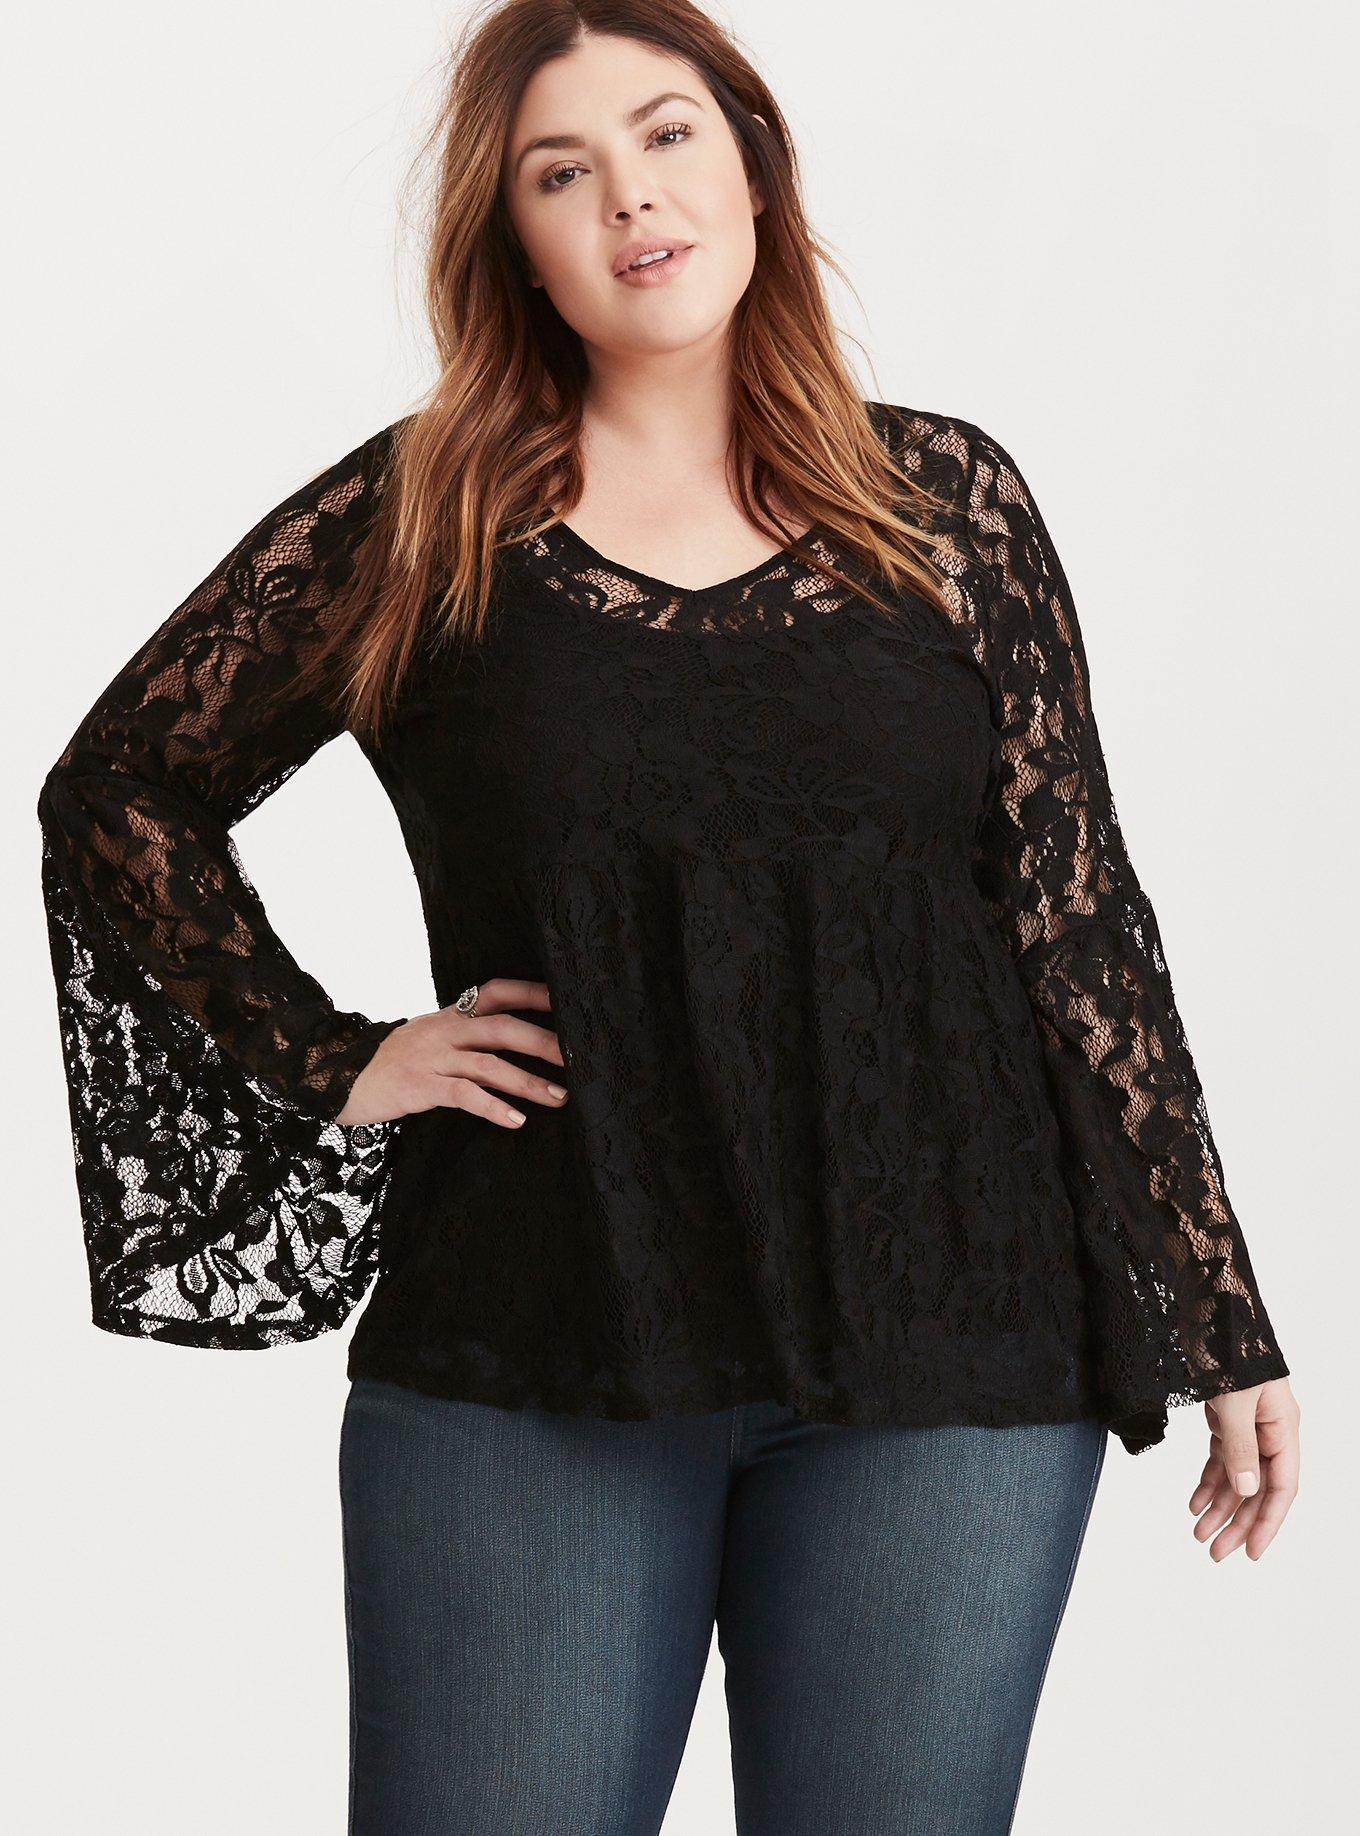 Plus Size - Lace Bell Sleeve Top - Torrid